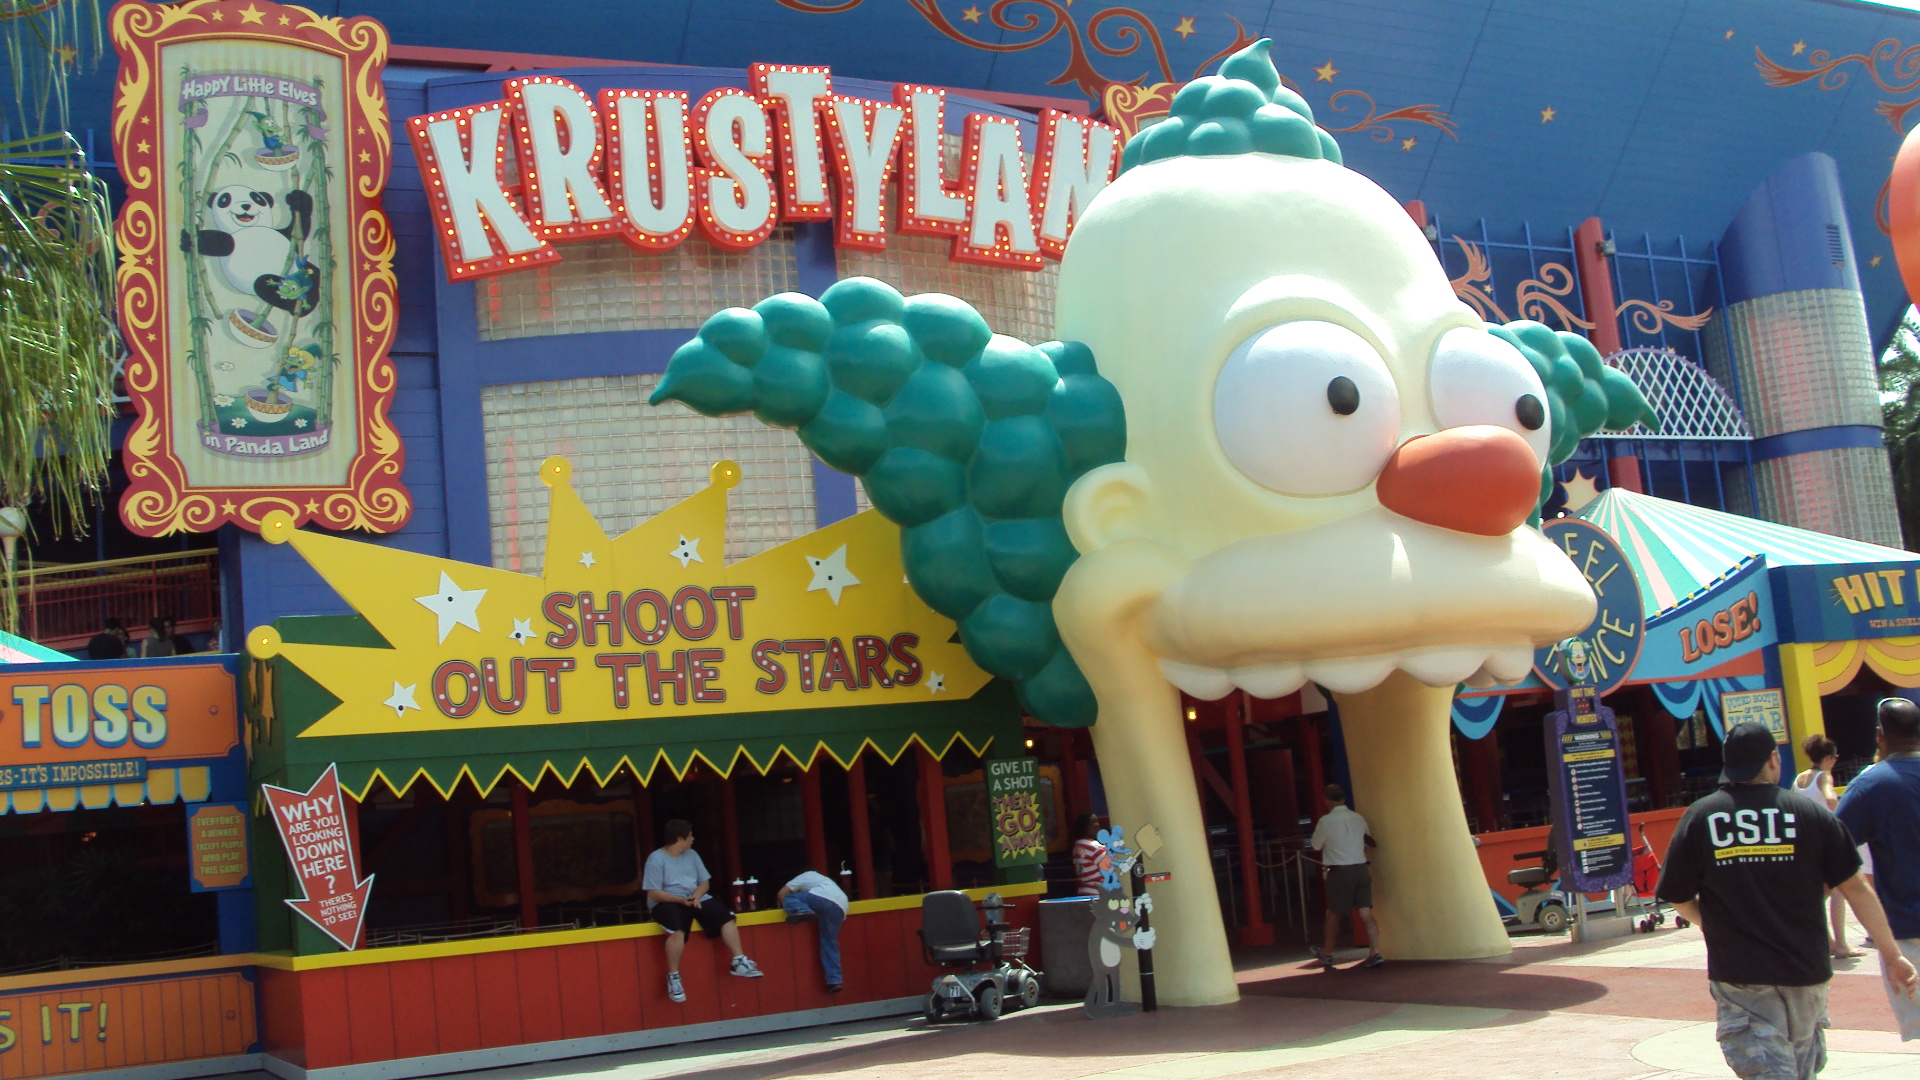 Krusty the Clown from The Simpsons